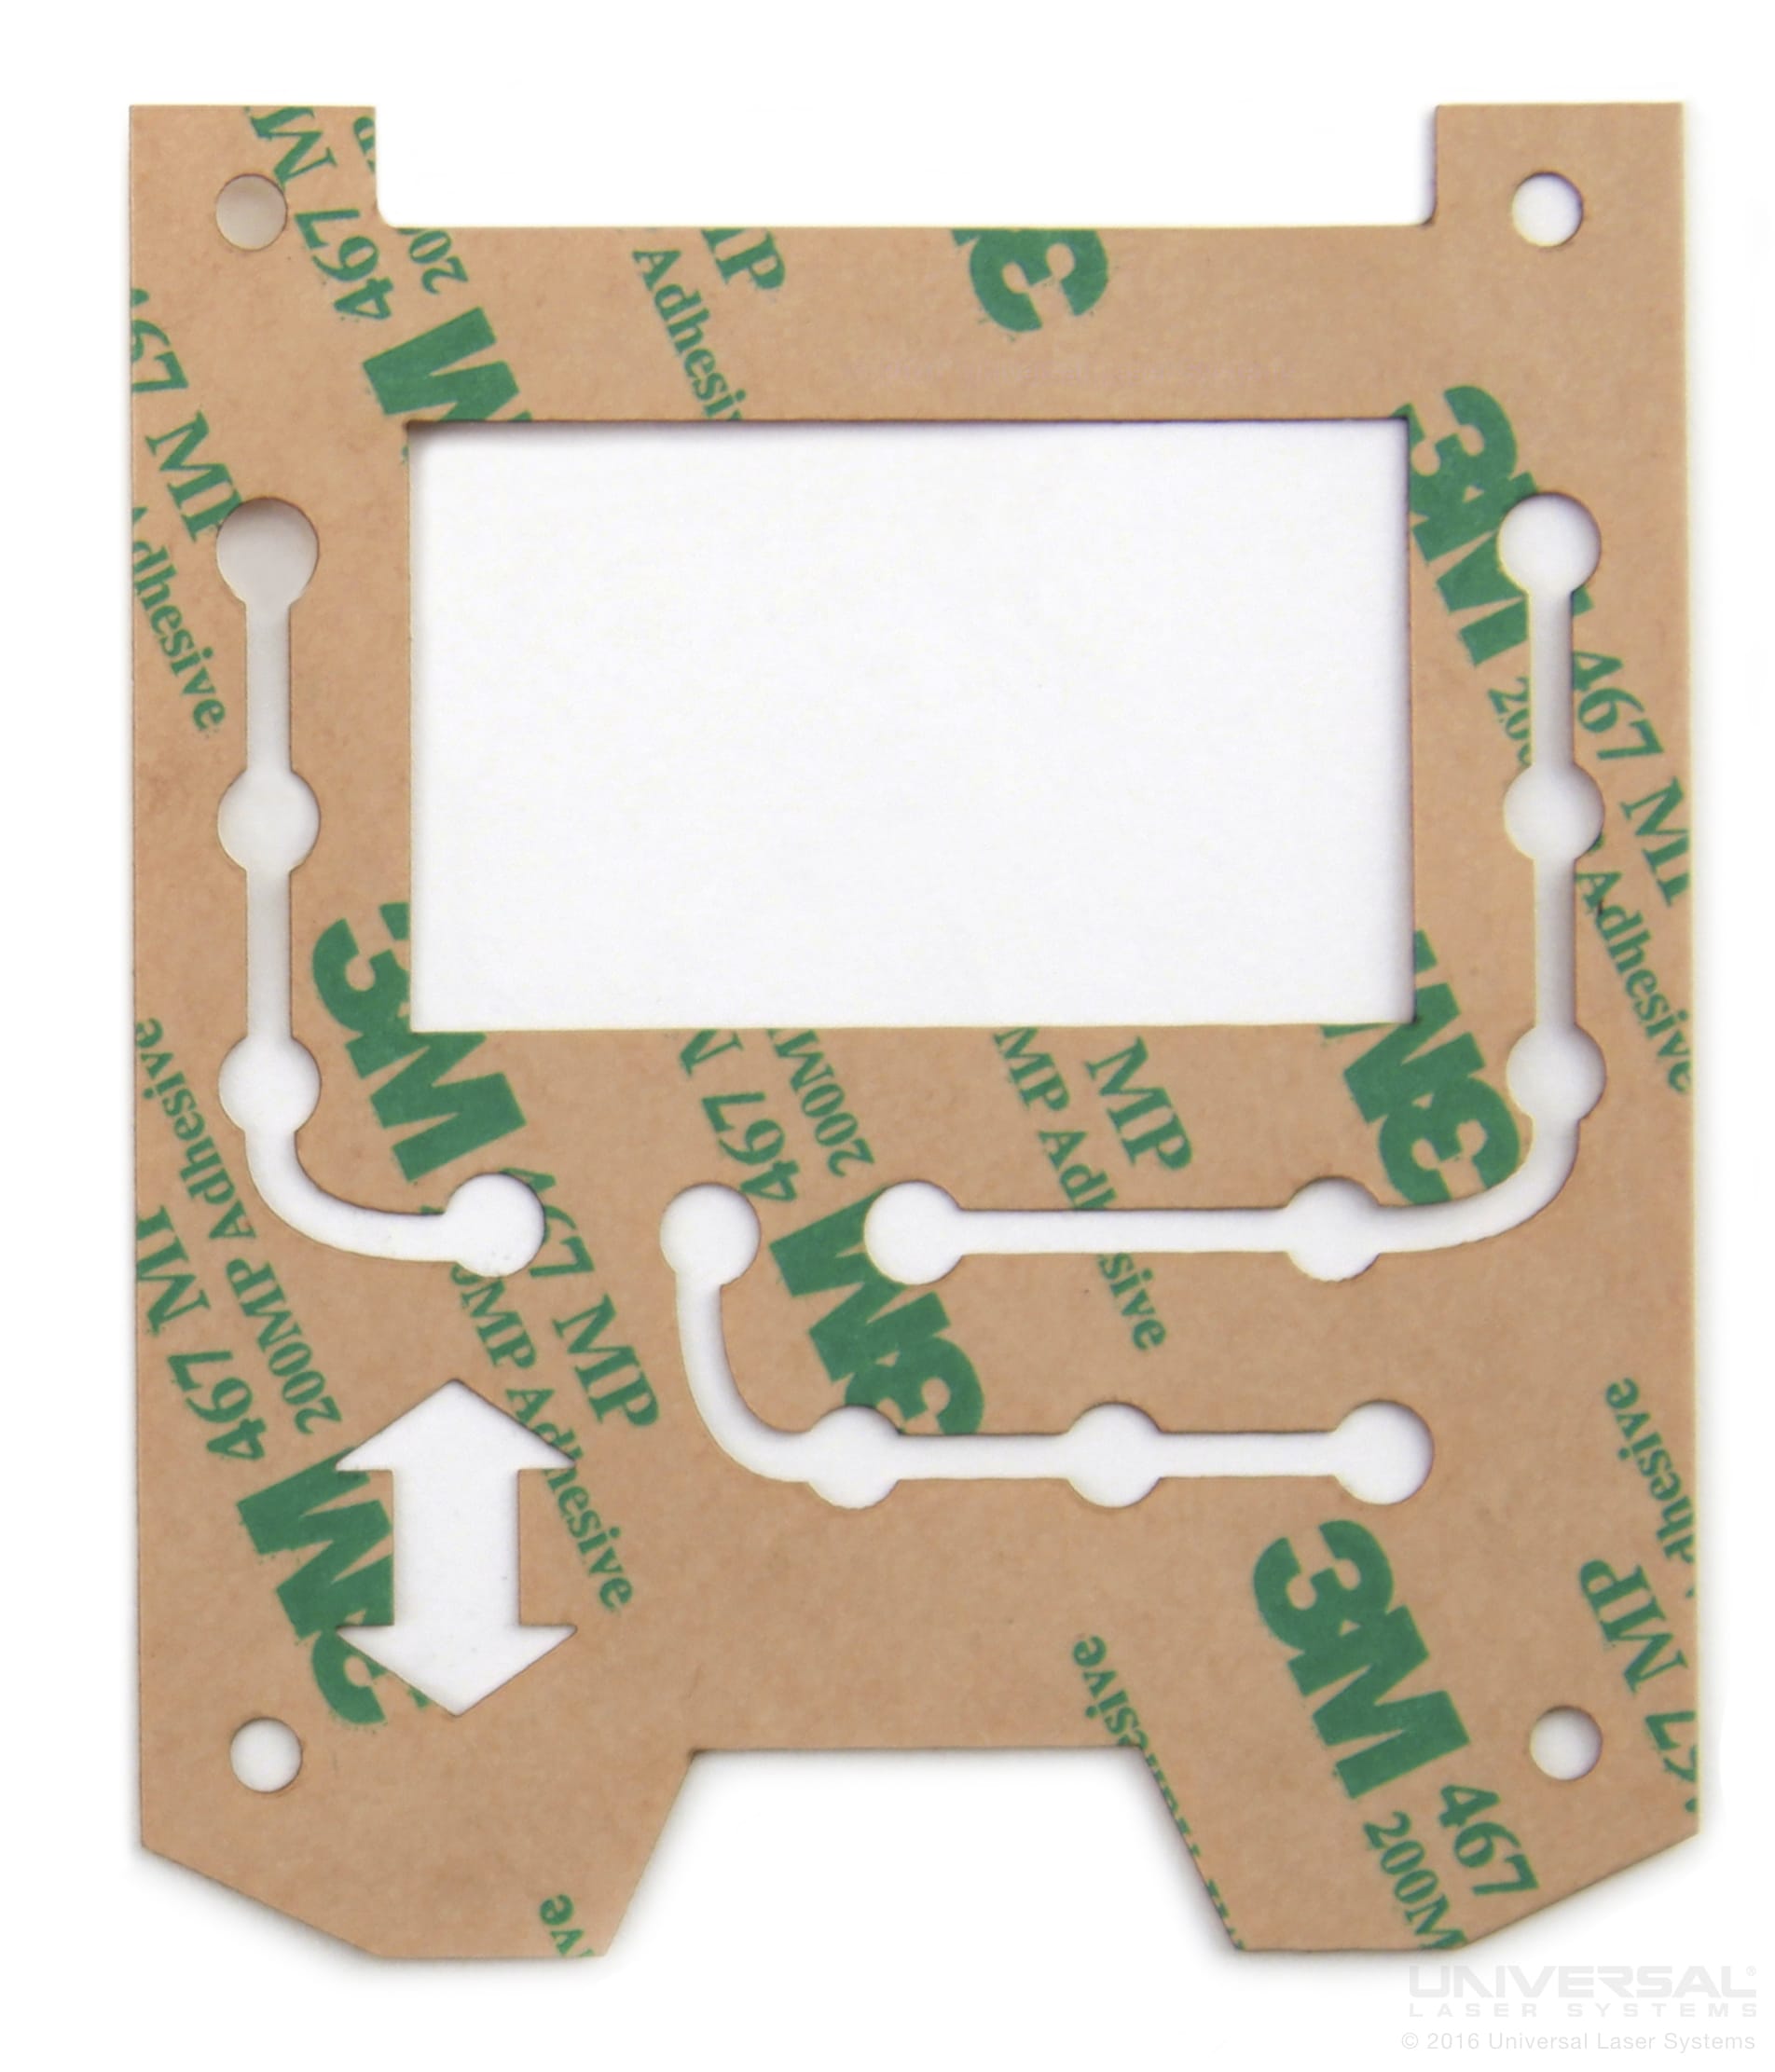 Membrane Switch Spacer Laser Cutting with a 10.6 micron CO<sub>2</sub> Laser